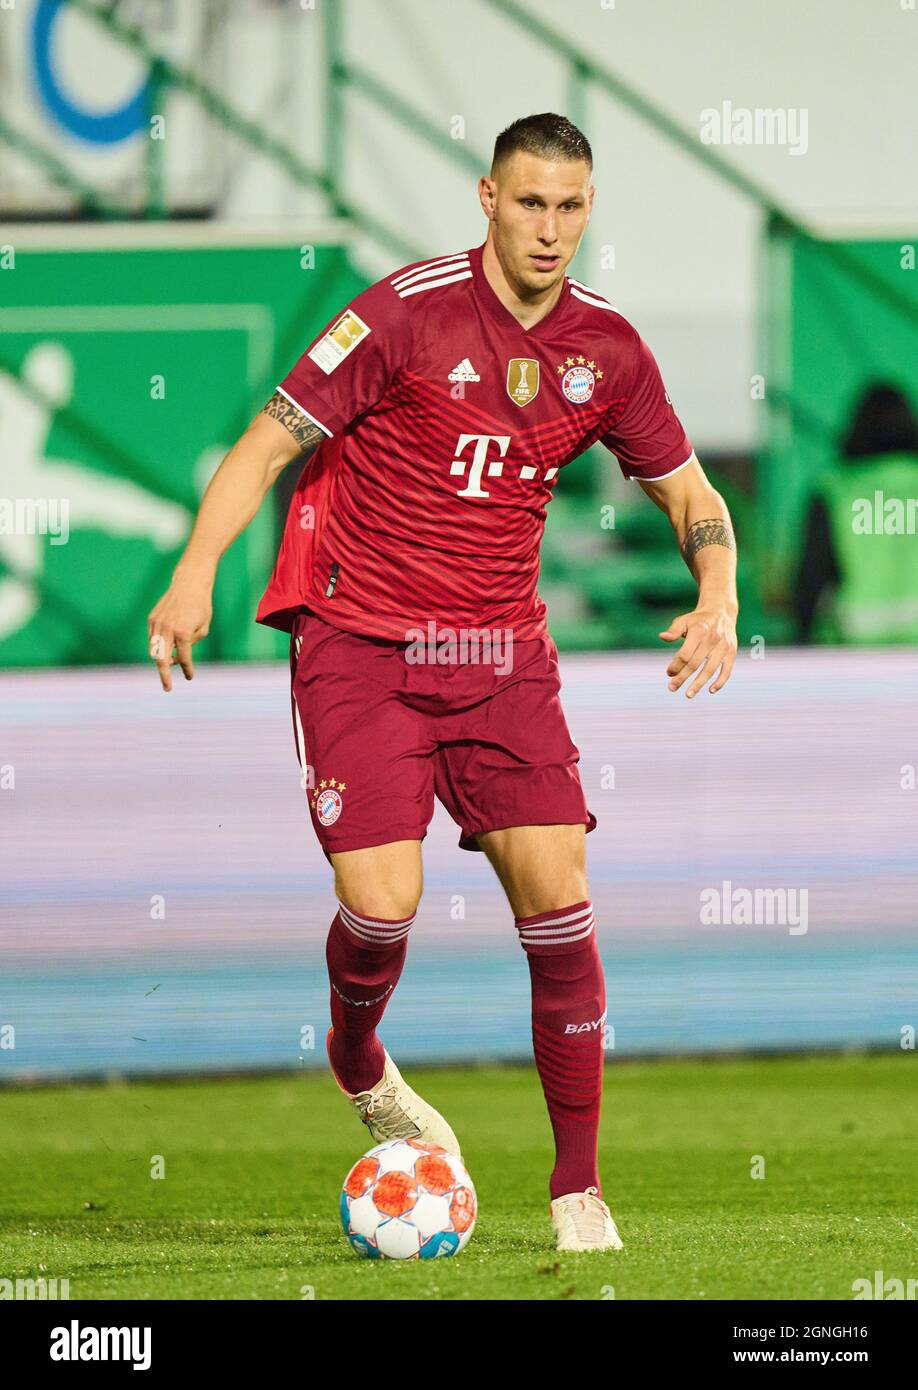 Niklas SUELE, SÜLE, FCB 4 in the match SpVgg GREUTHER FÜRTH - FC BAYERN  MUENCHEN 1-3 1.German Football League on September 24, 2021 in Fuerth,  Germany. Season 2021/2022, matchday 7, 1.Bundesliga, FCB,